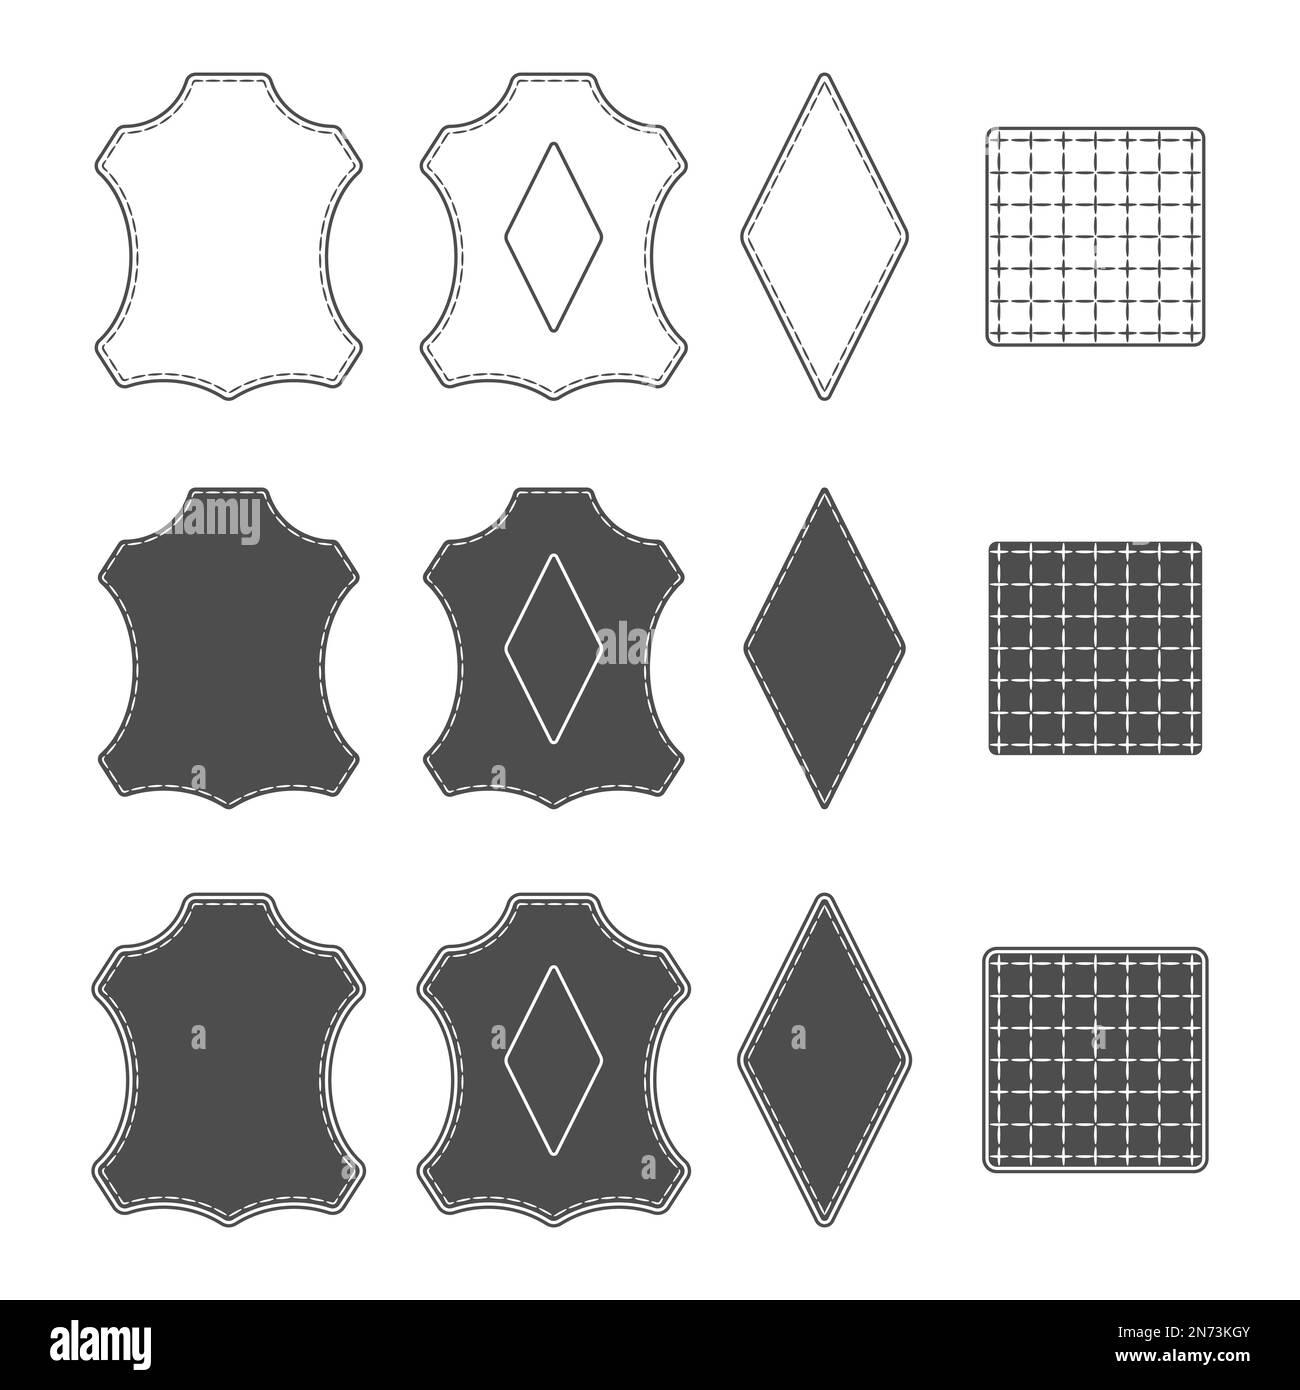 Set of black and white illustration with sign of genuine leather, textiles, other materials. Isolated vector objects on a white background. Stock Vector